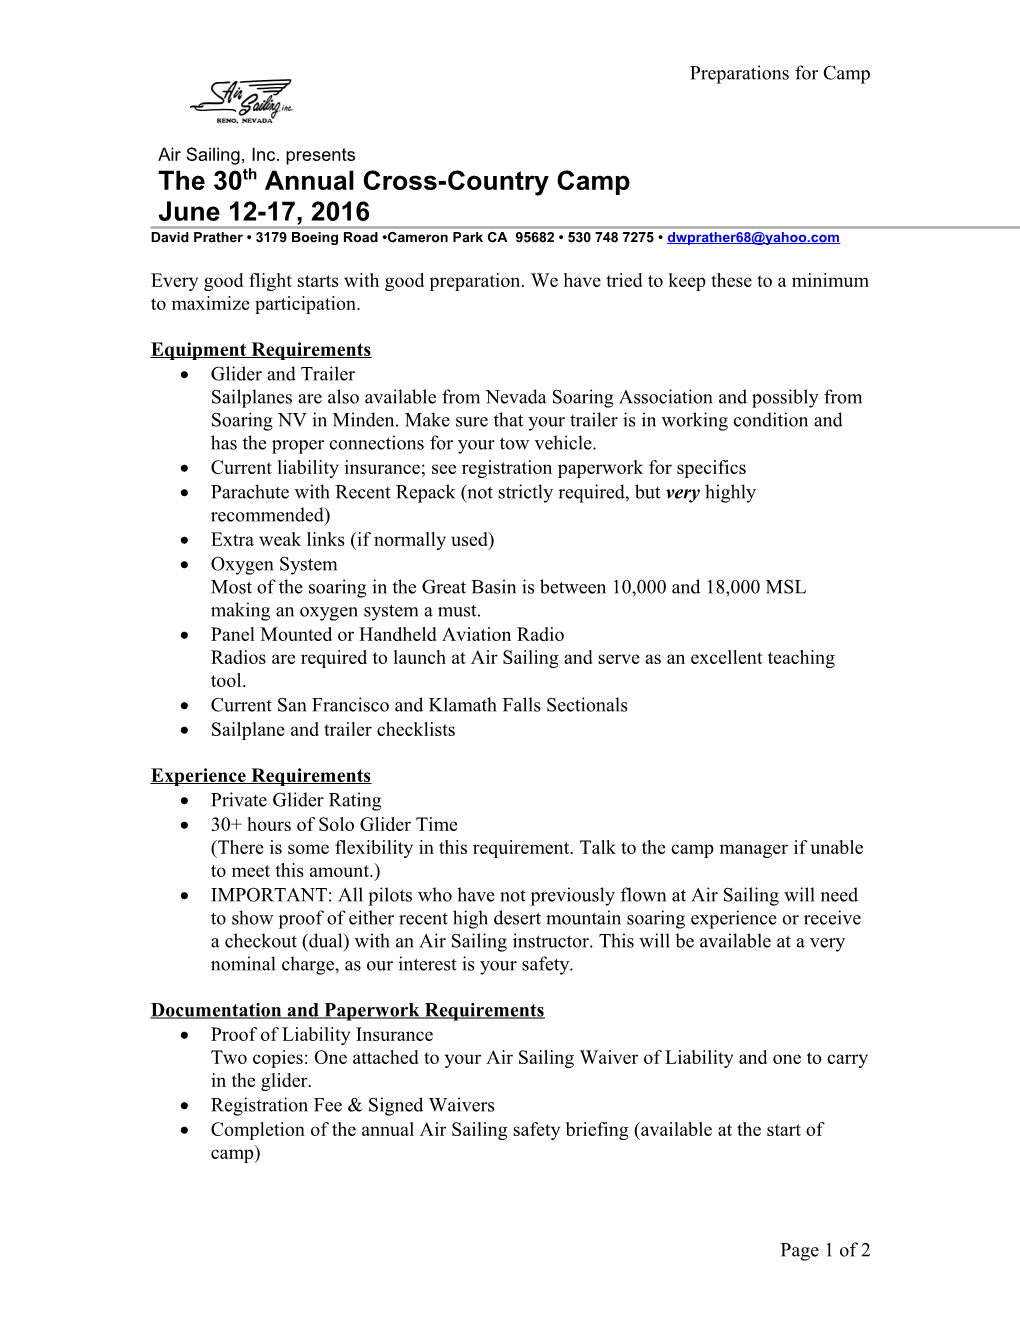 Air Sailing, Inc. Presents the 30Th Annual Cross-Country Camp